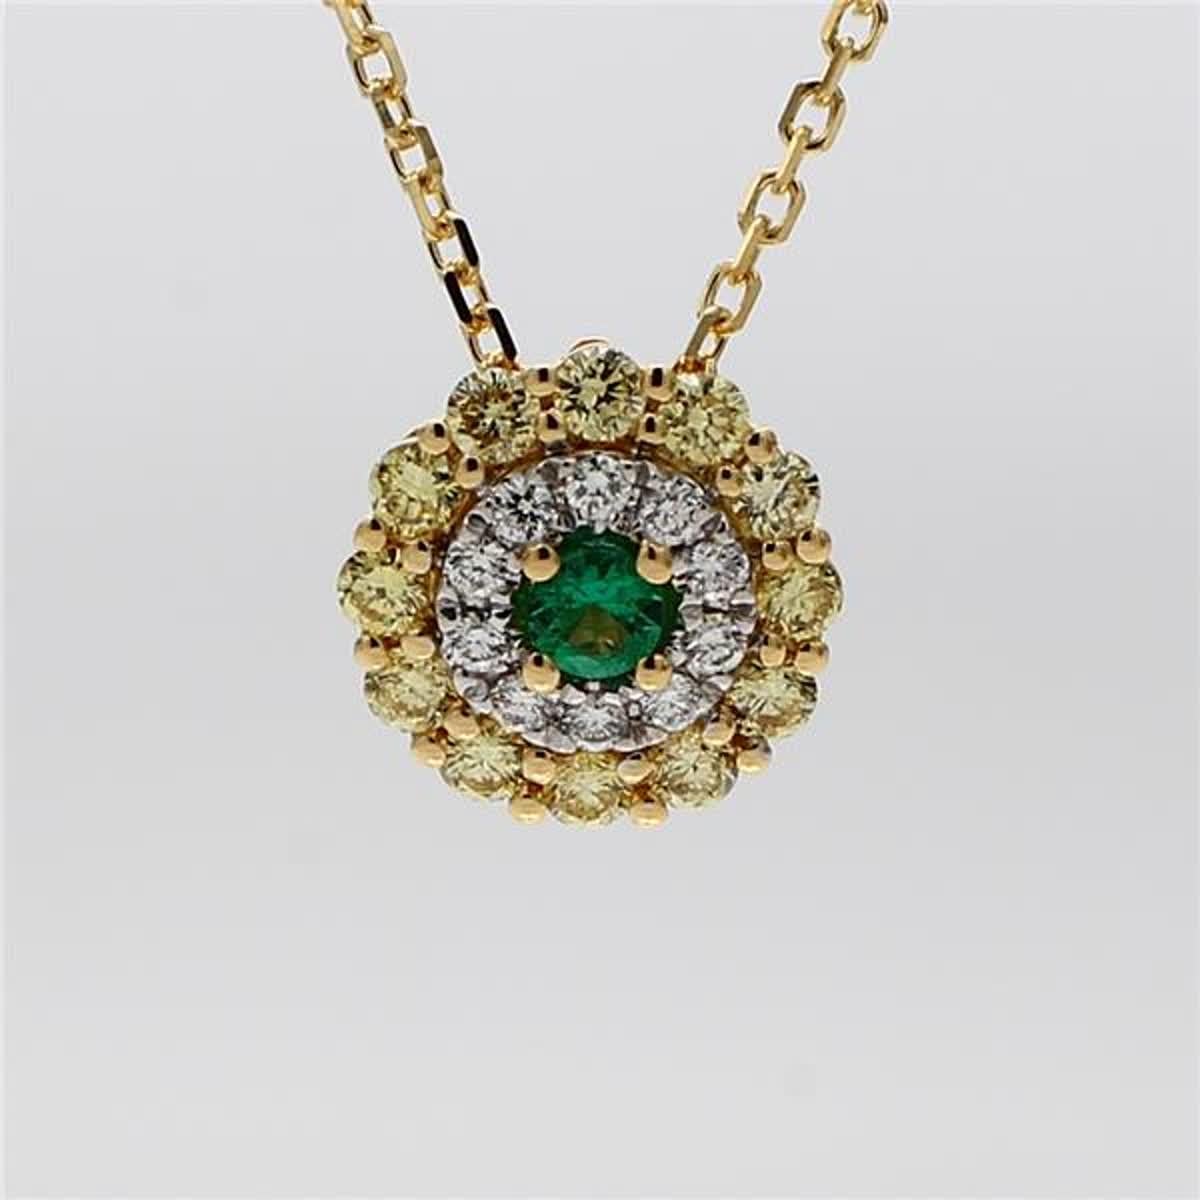 RareGemWorld's classic emerald pendant. Mounted in a beautiful 18K Yellow and White Gold setting with a natural round cut emerald. The emerald is surrounded by natural round yellow diamond melee and natural round white diamond melee in a beautiful